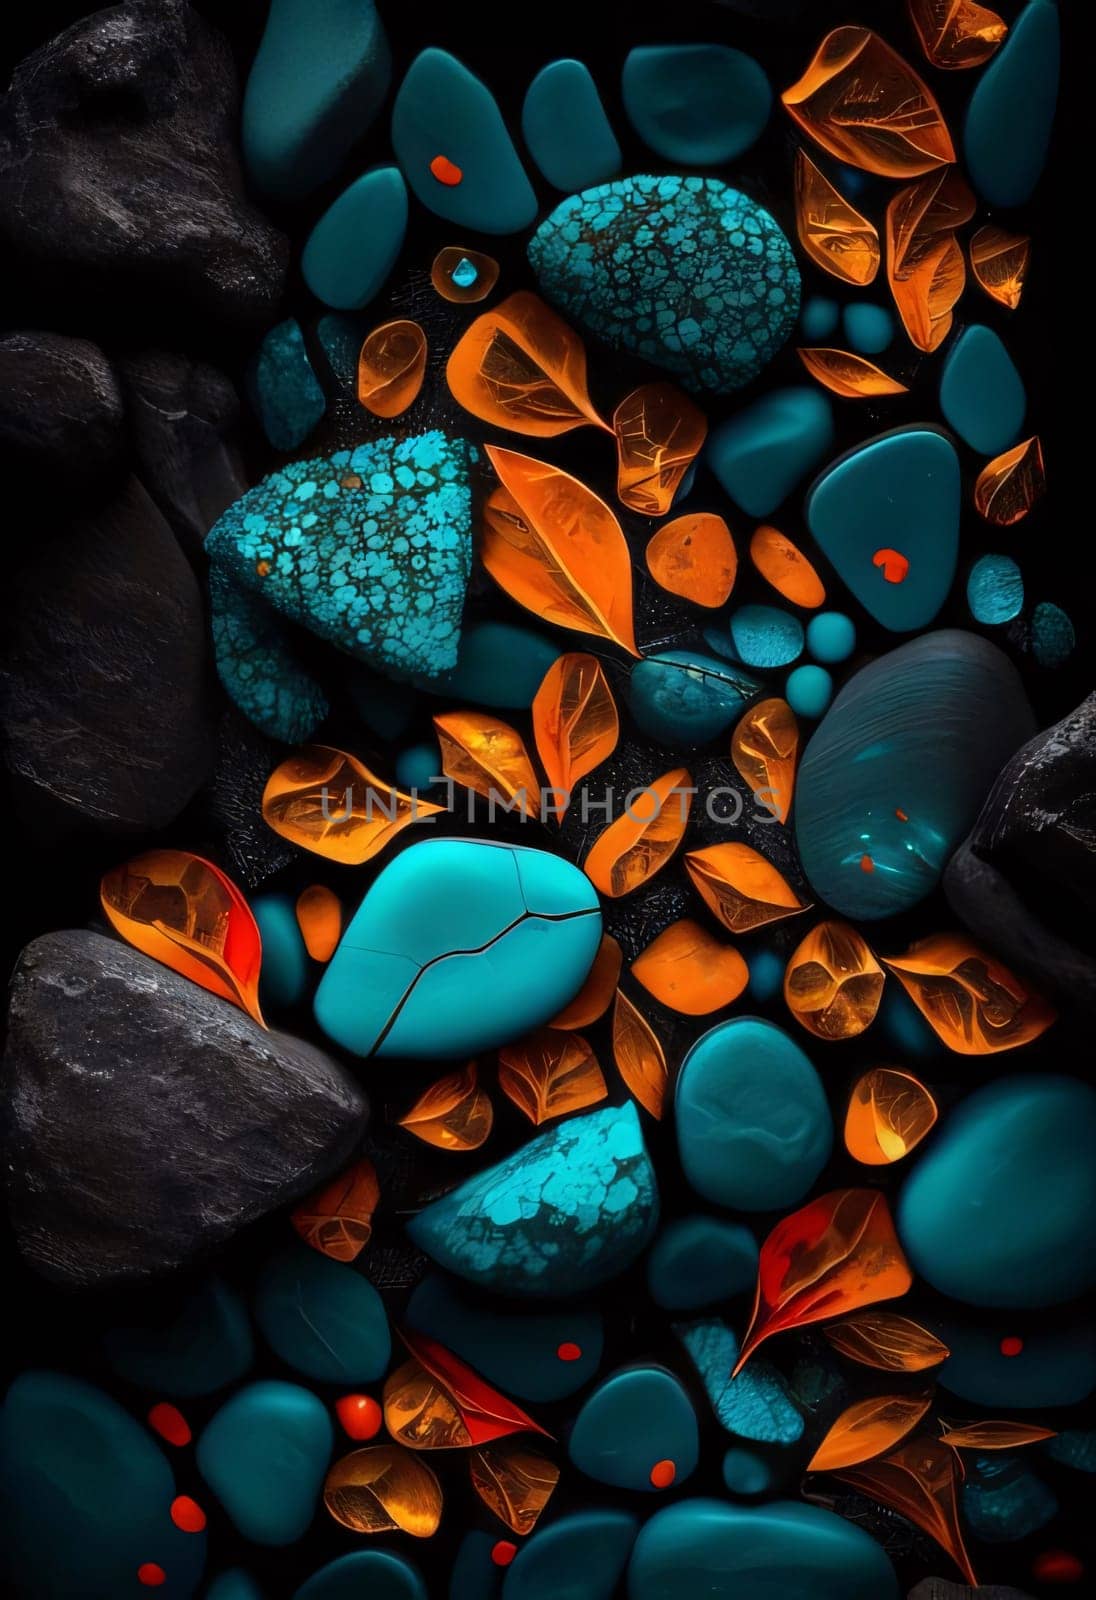 Abstract background design: Colorful stones with orange and blue petals on black background.